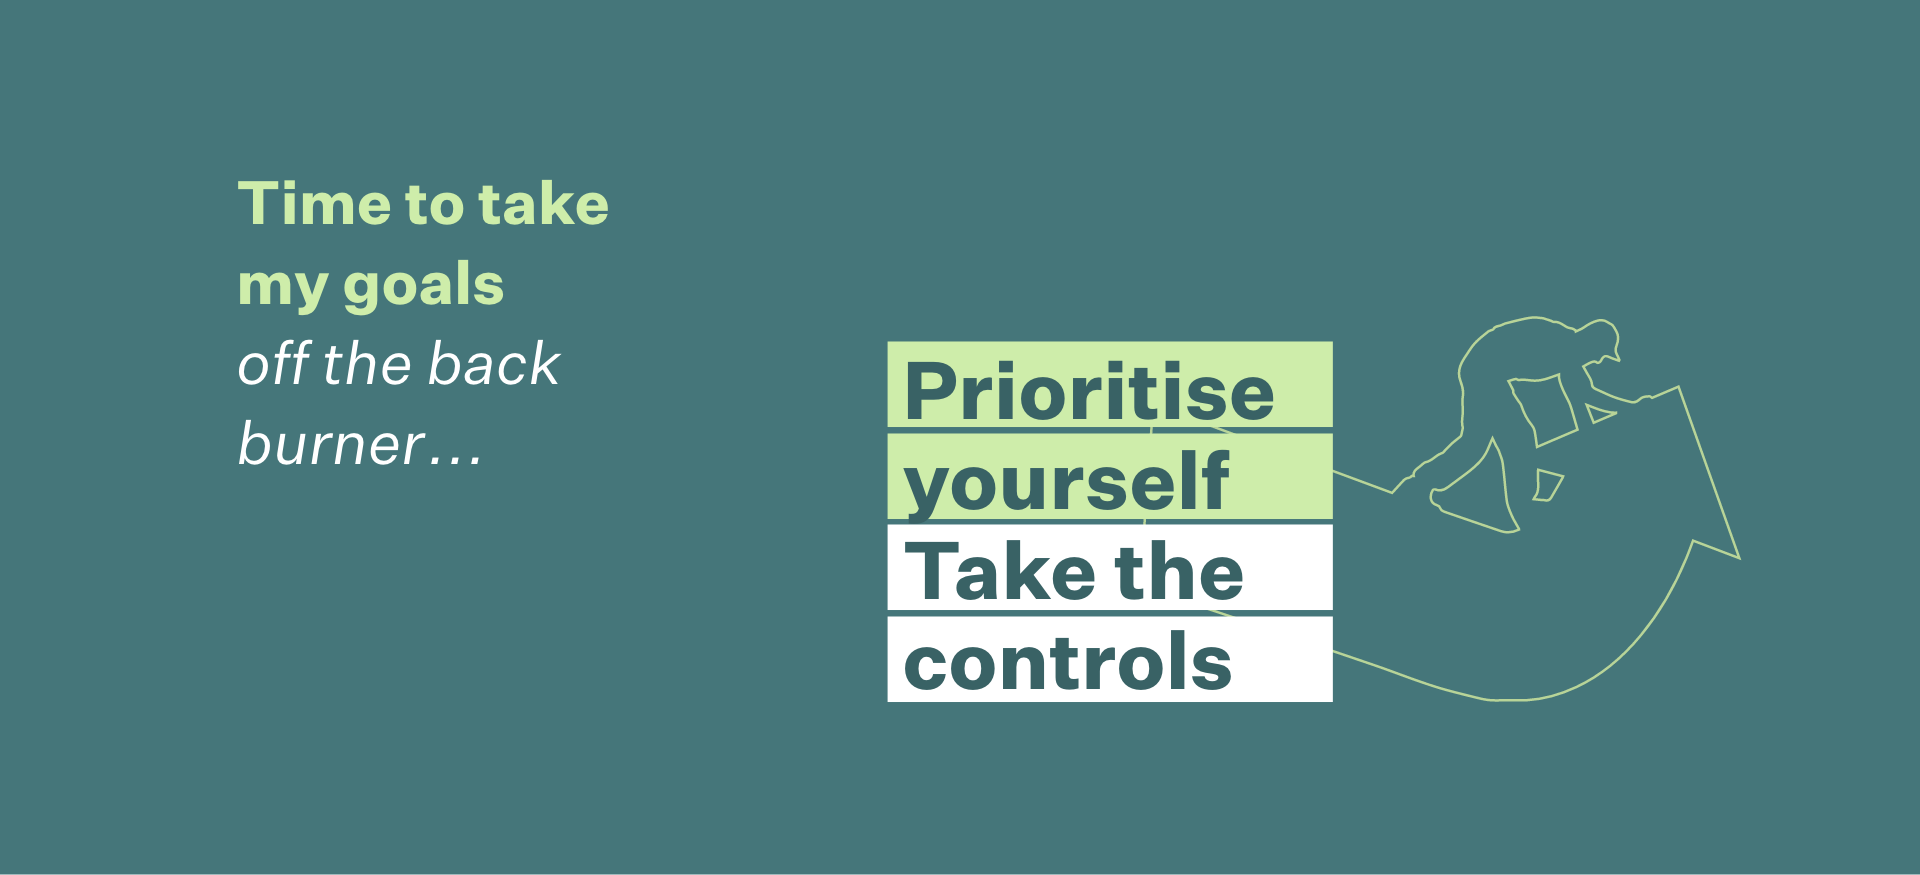 Time to take my goals off the back burner... Prioritise yourself Take the Controls